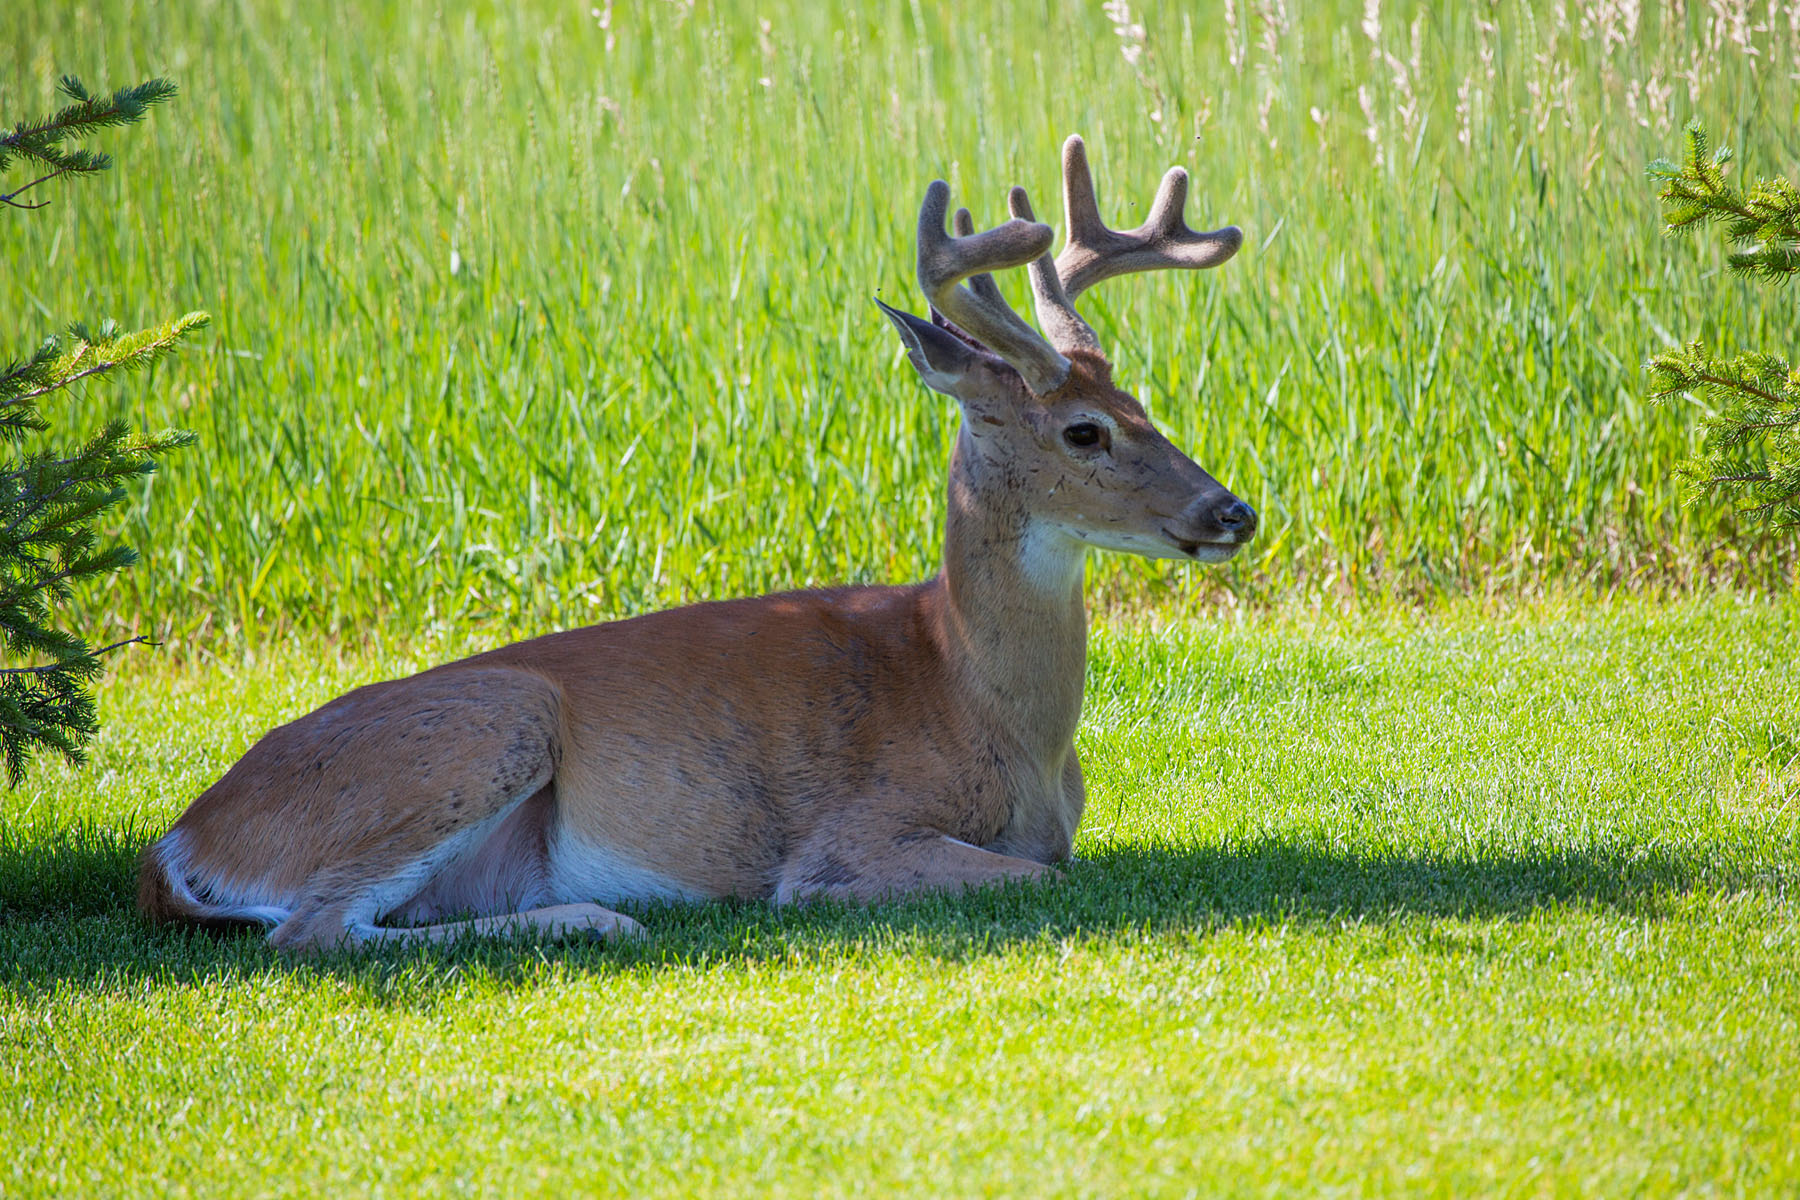 Deer in yard.  Click for next photo.